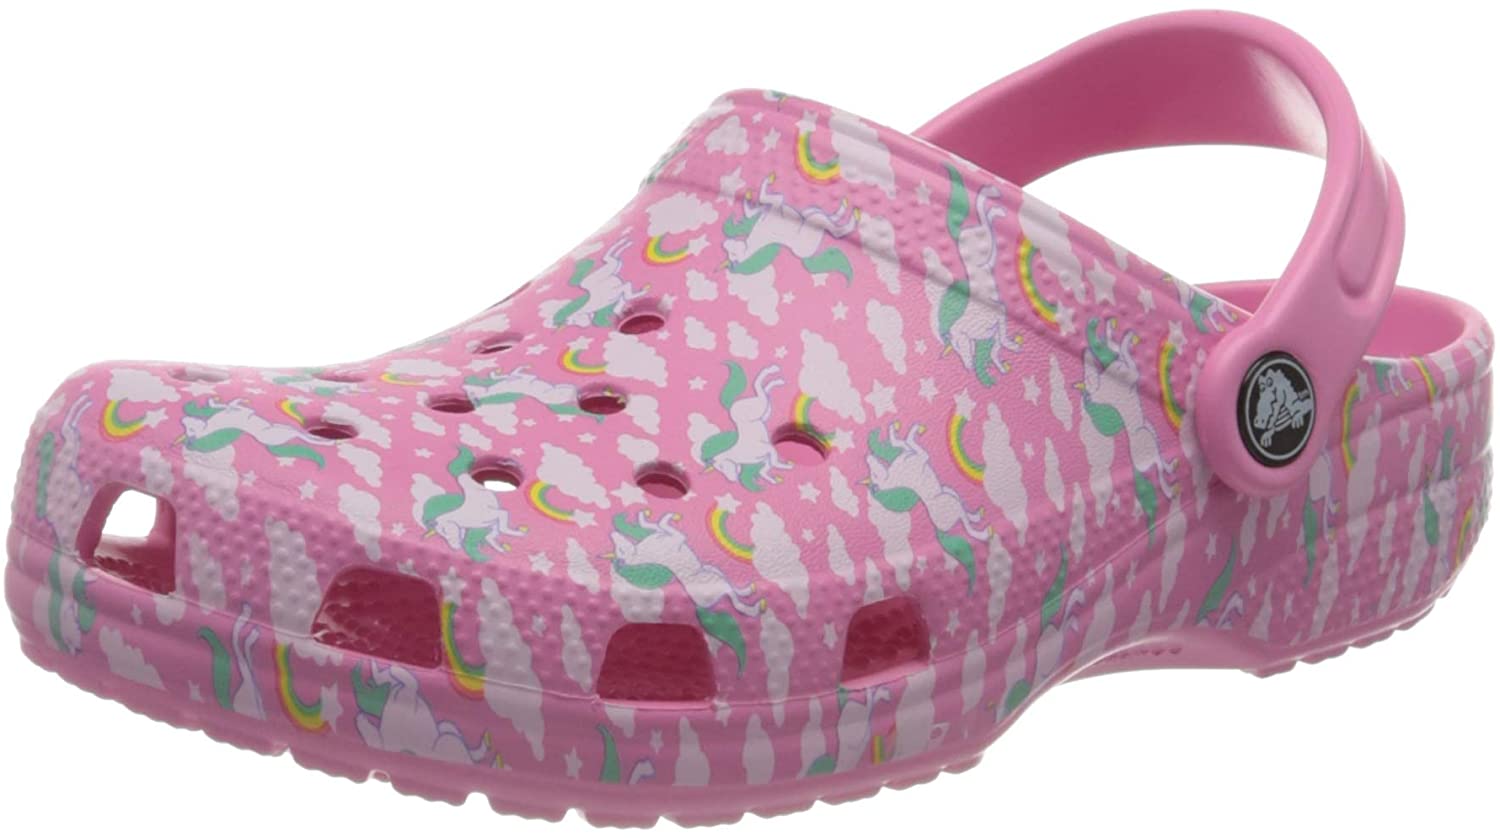 Crocs Kids Classic Graphic Clog Slip on Water Shoes